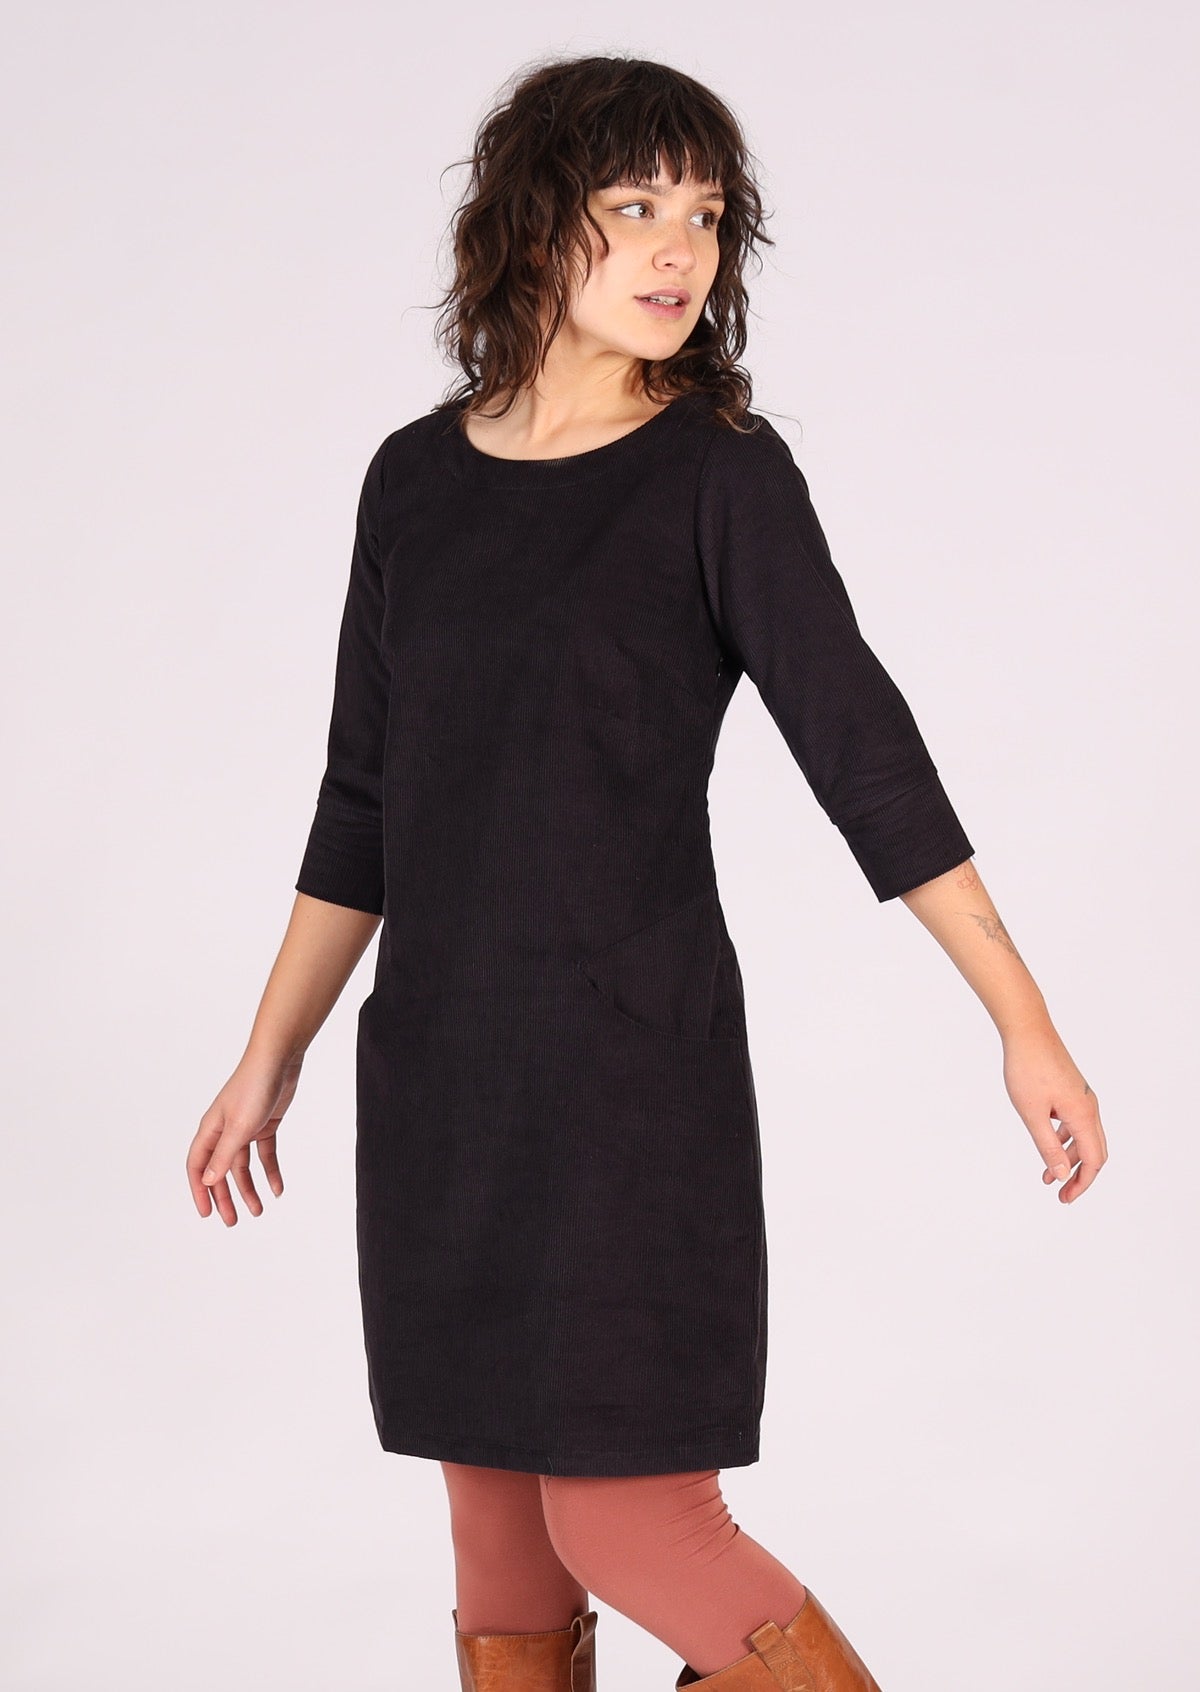 Cotton corduroy dress that sits above the knee